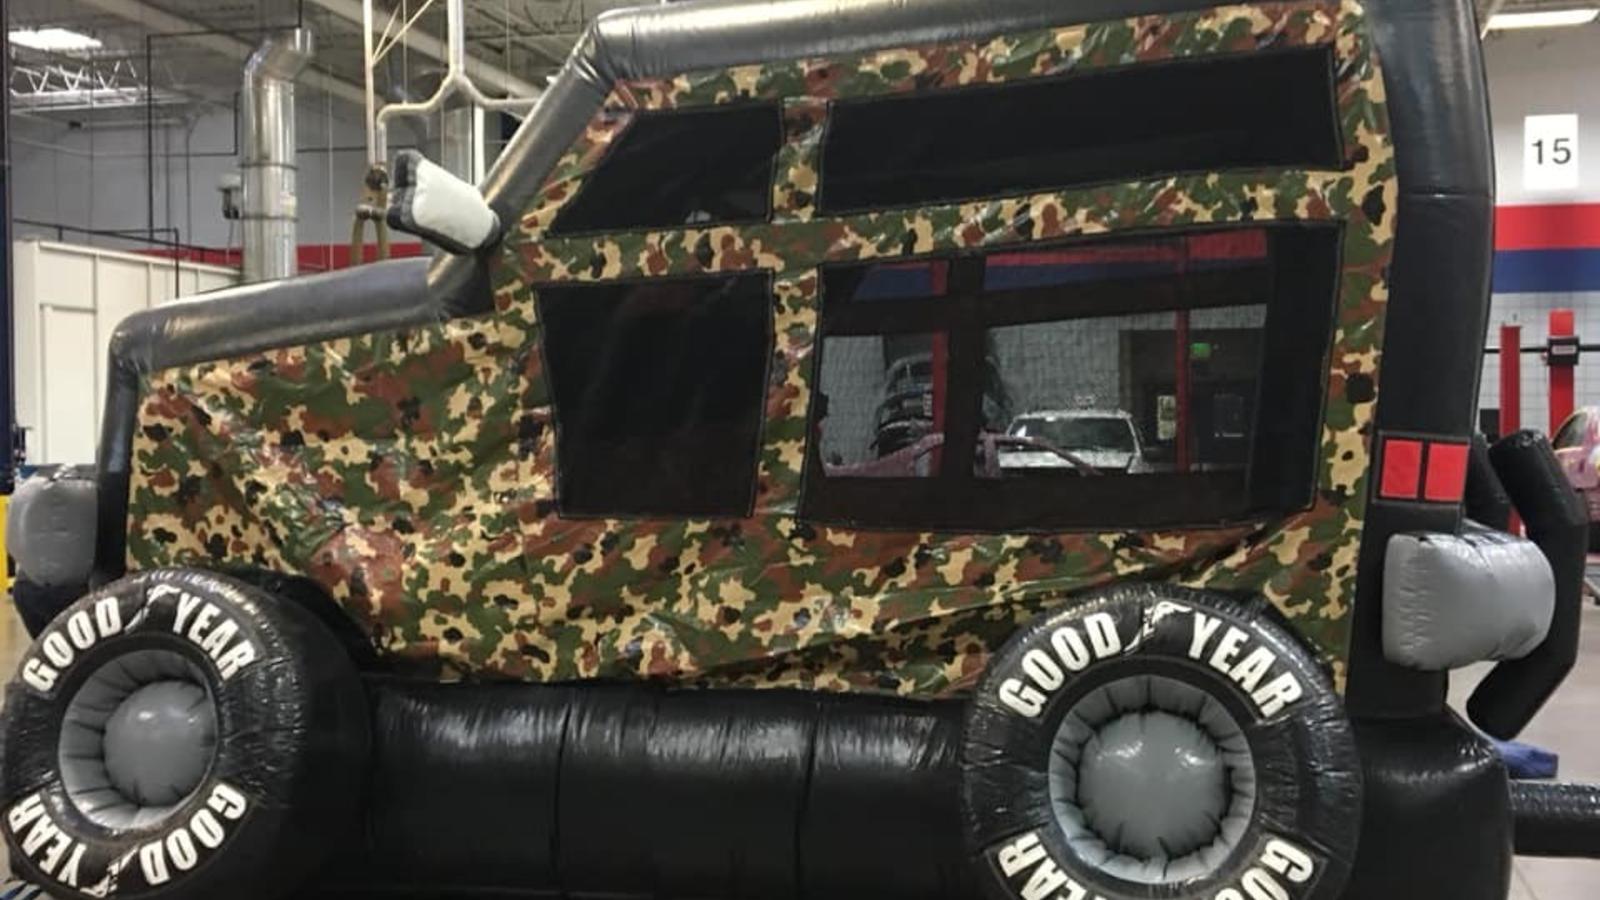 The annual toys for tots in Denver had the coolest jeep bouncy house this year